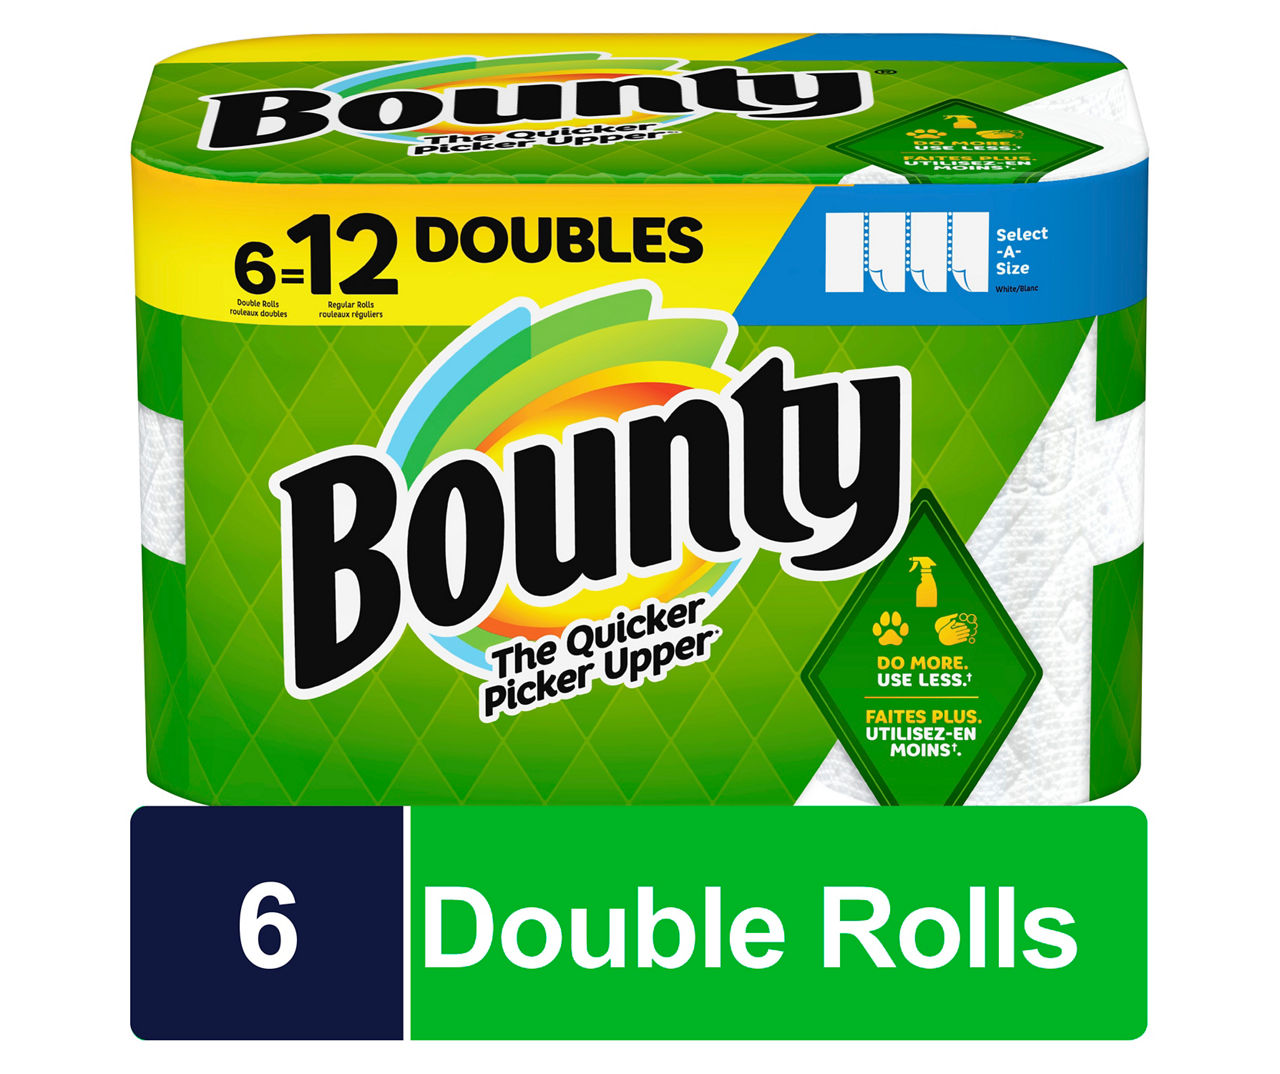 Bounty Select-A-Size Paper Towels, White, 6 Double Rolls = 12 Regular Rolls